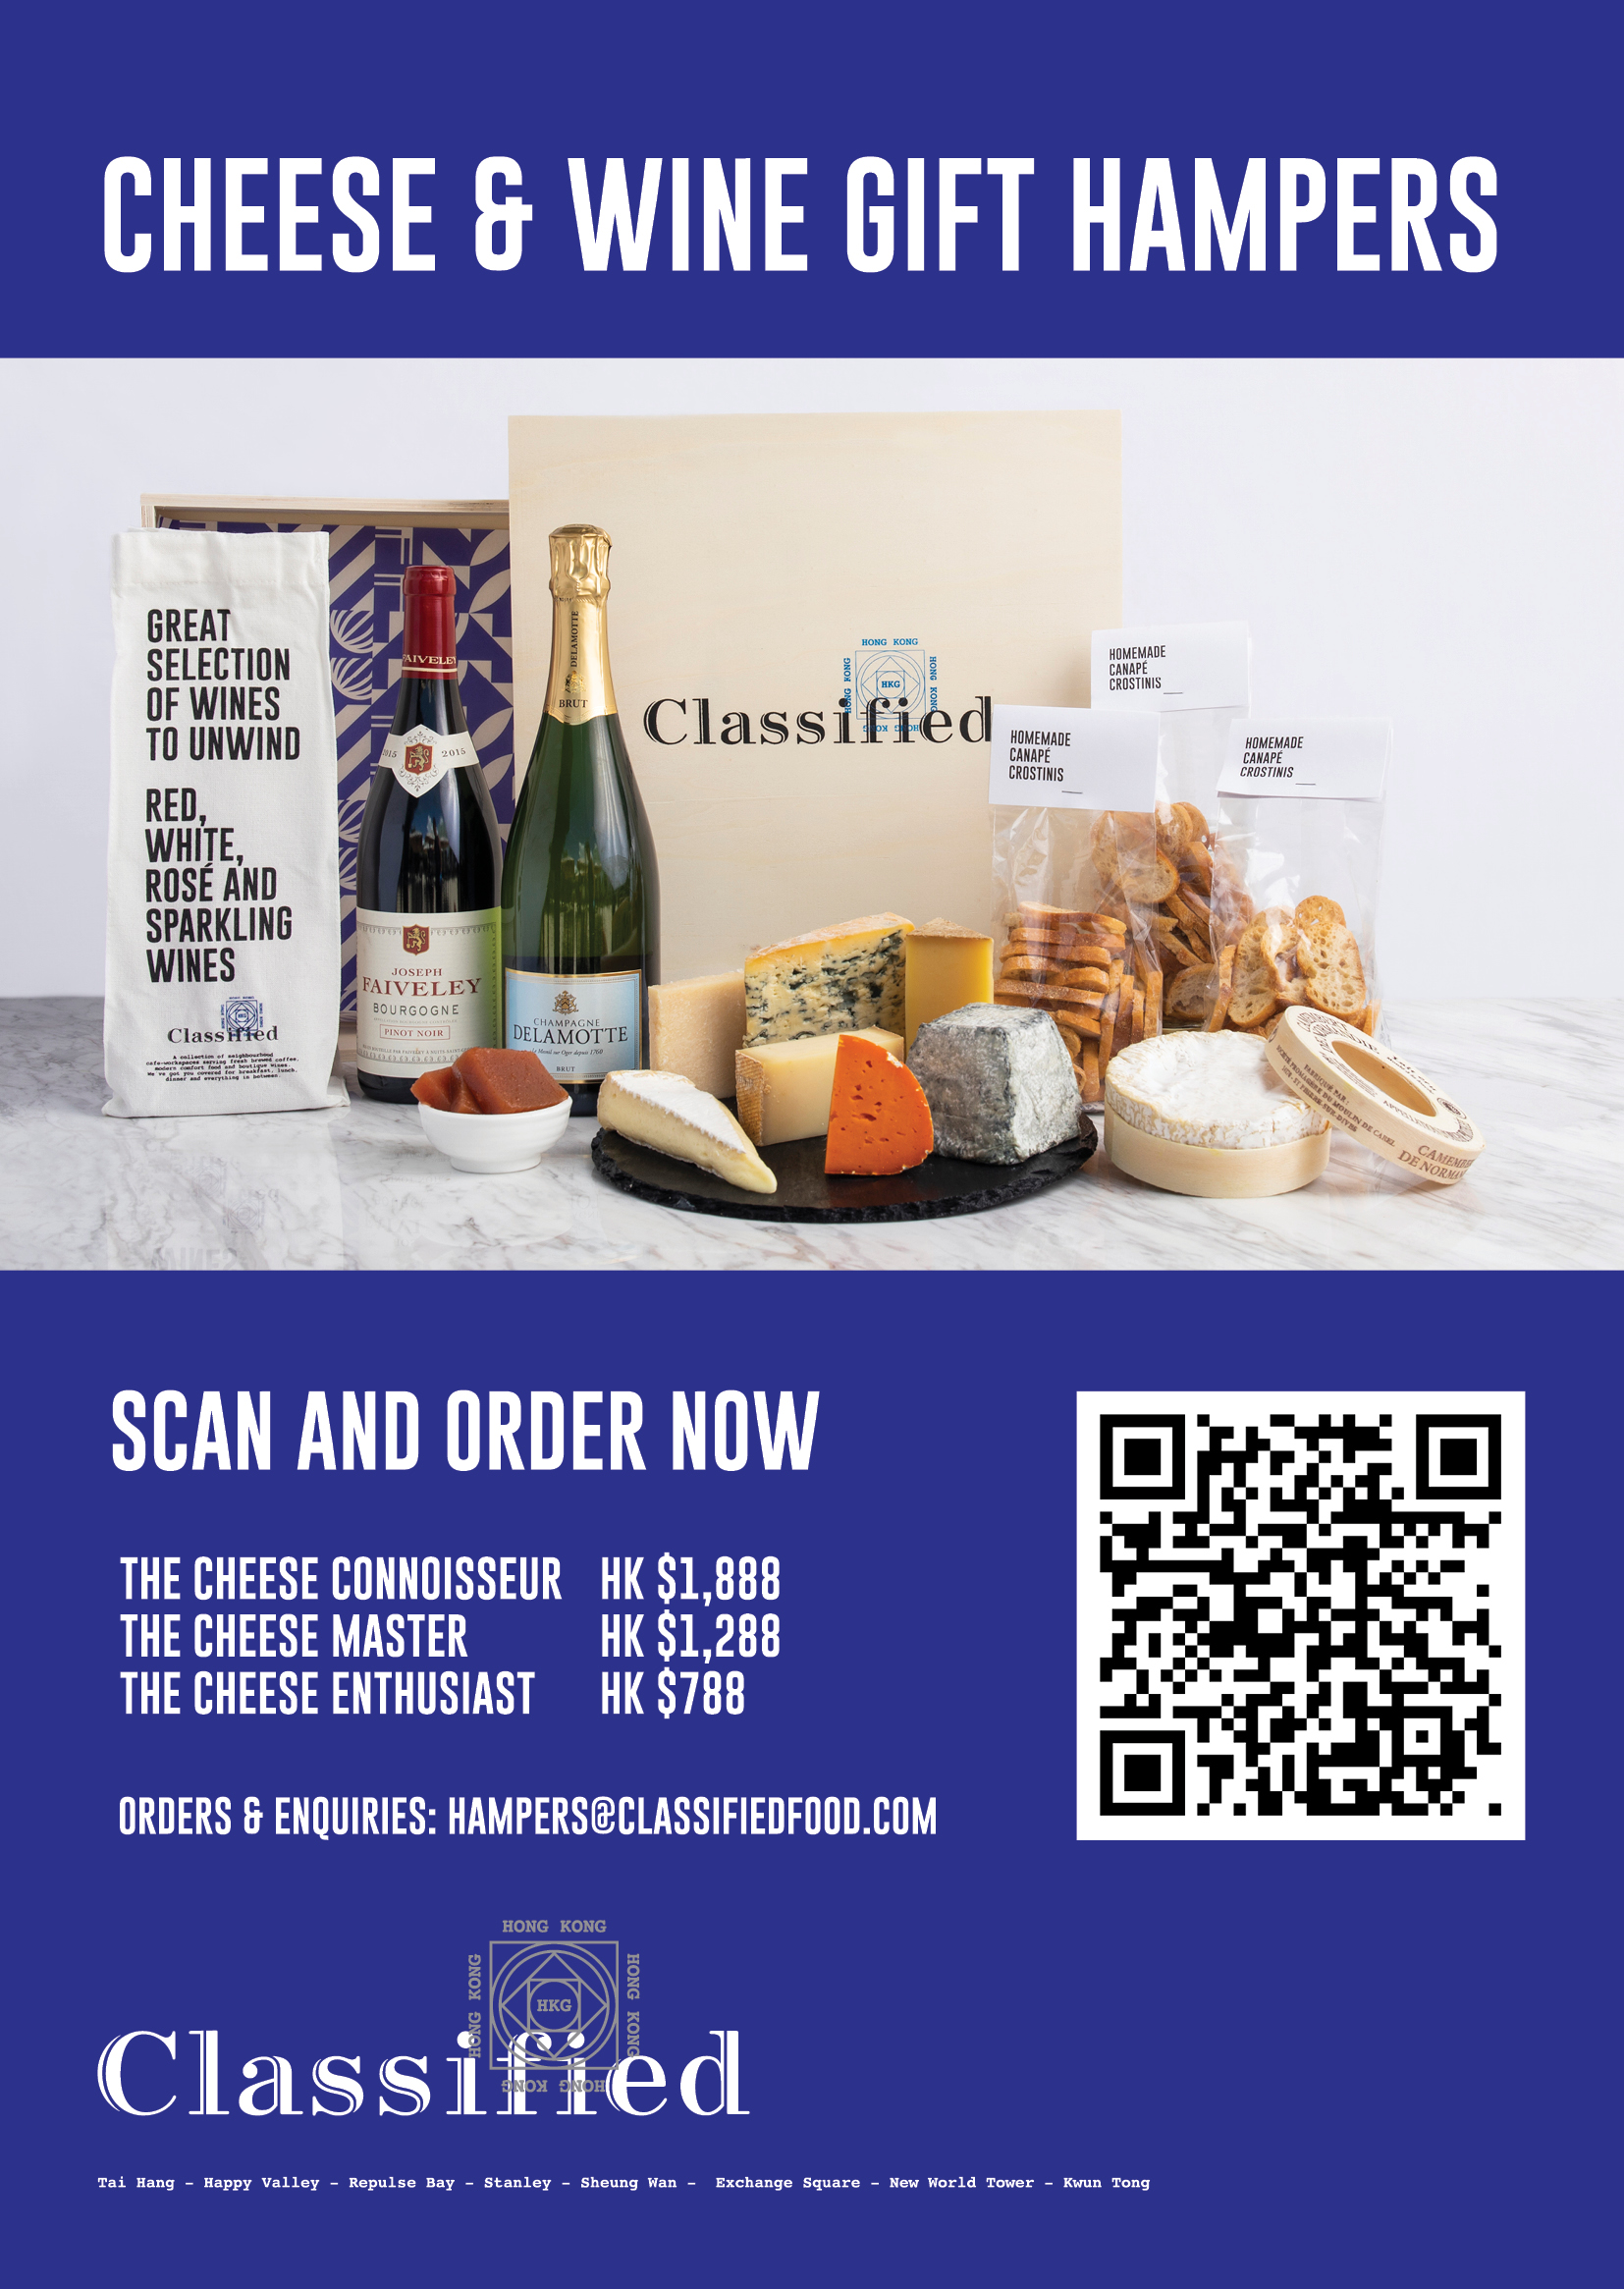 Classified Cheese & Wine Hampers